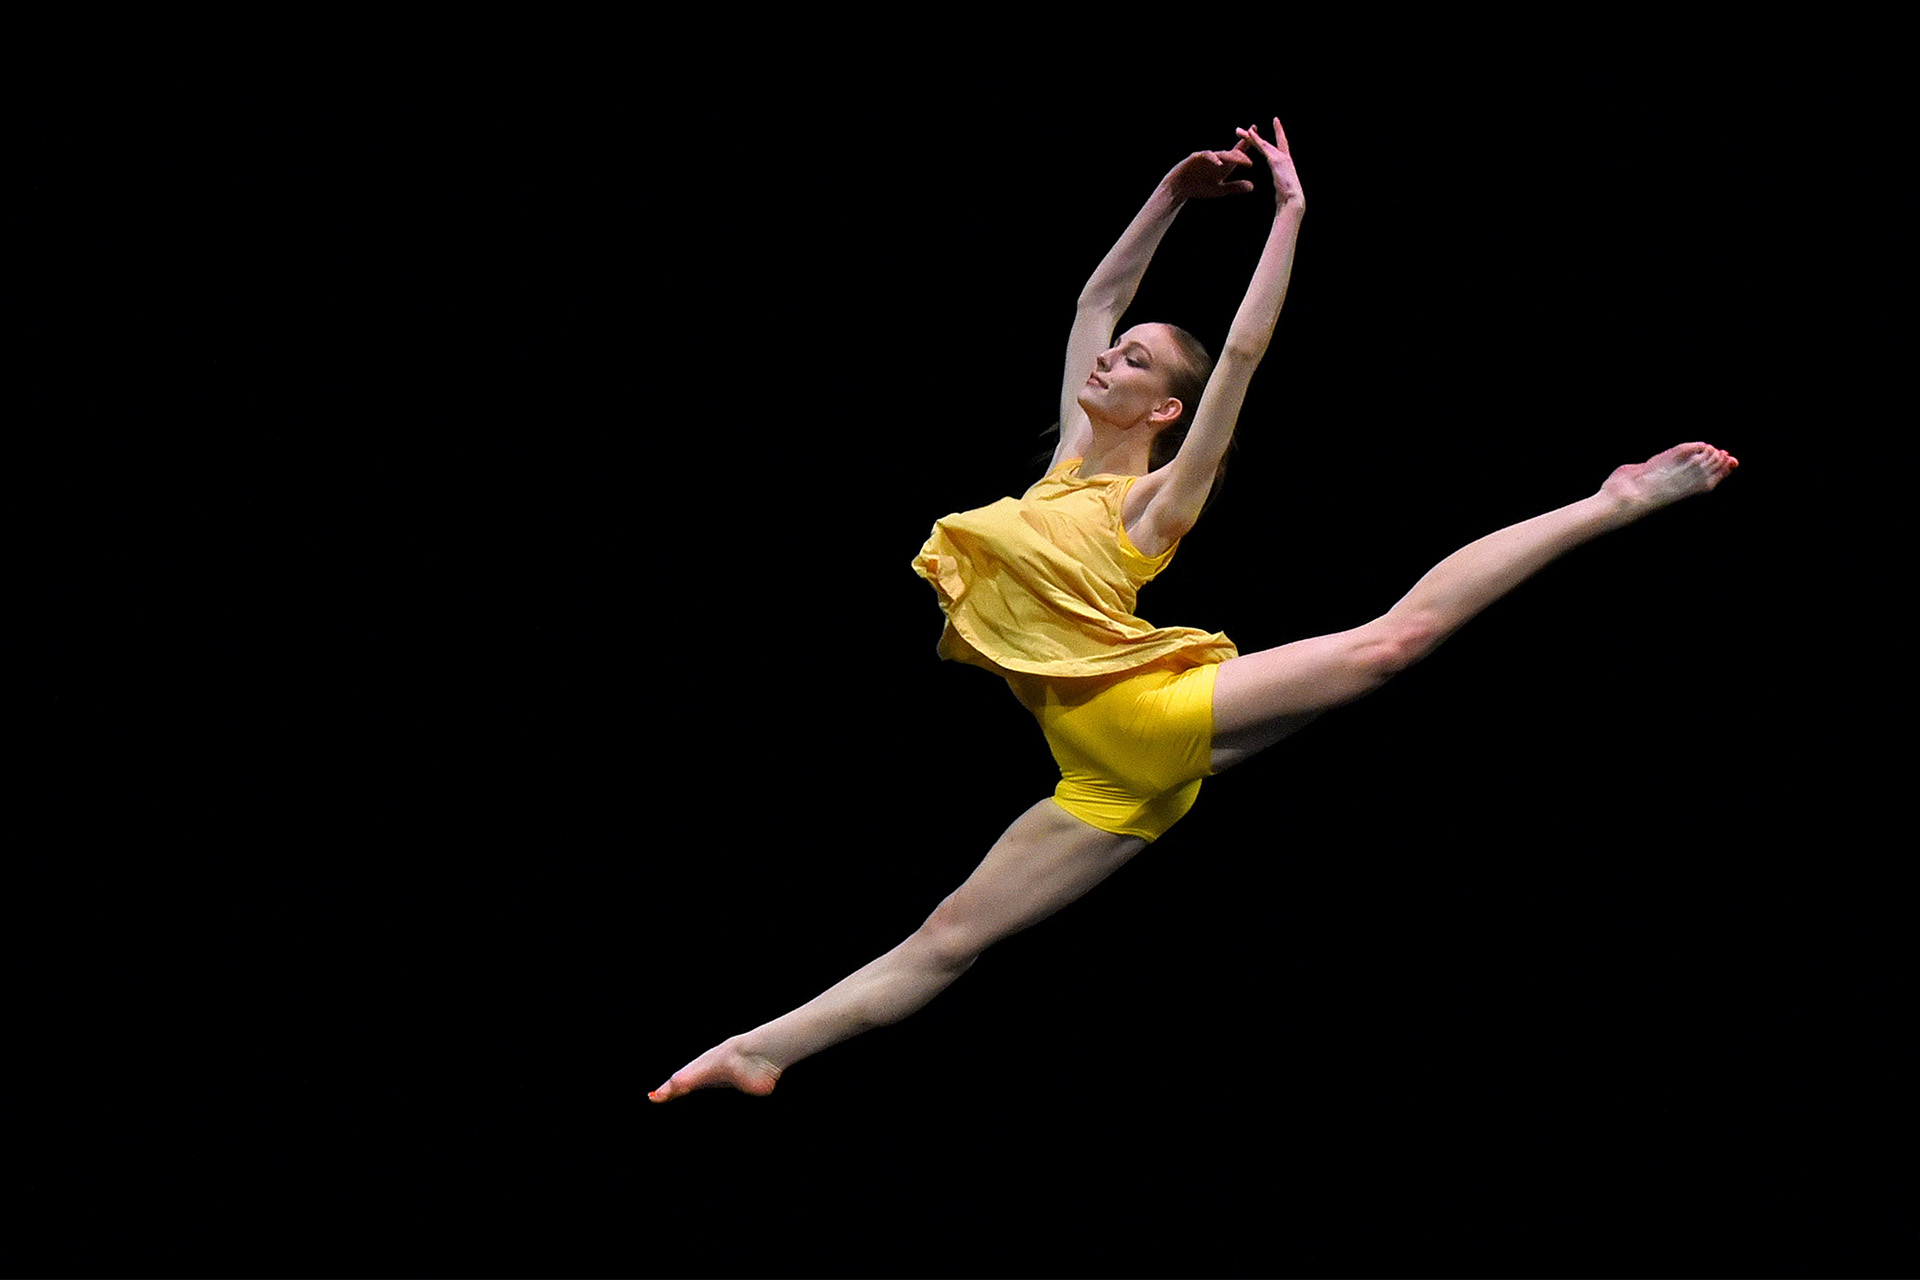 A dancer in a yellow stage costume leaping